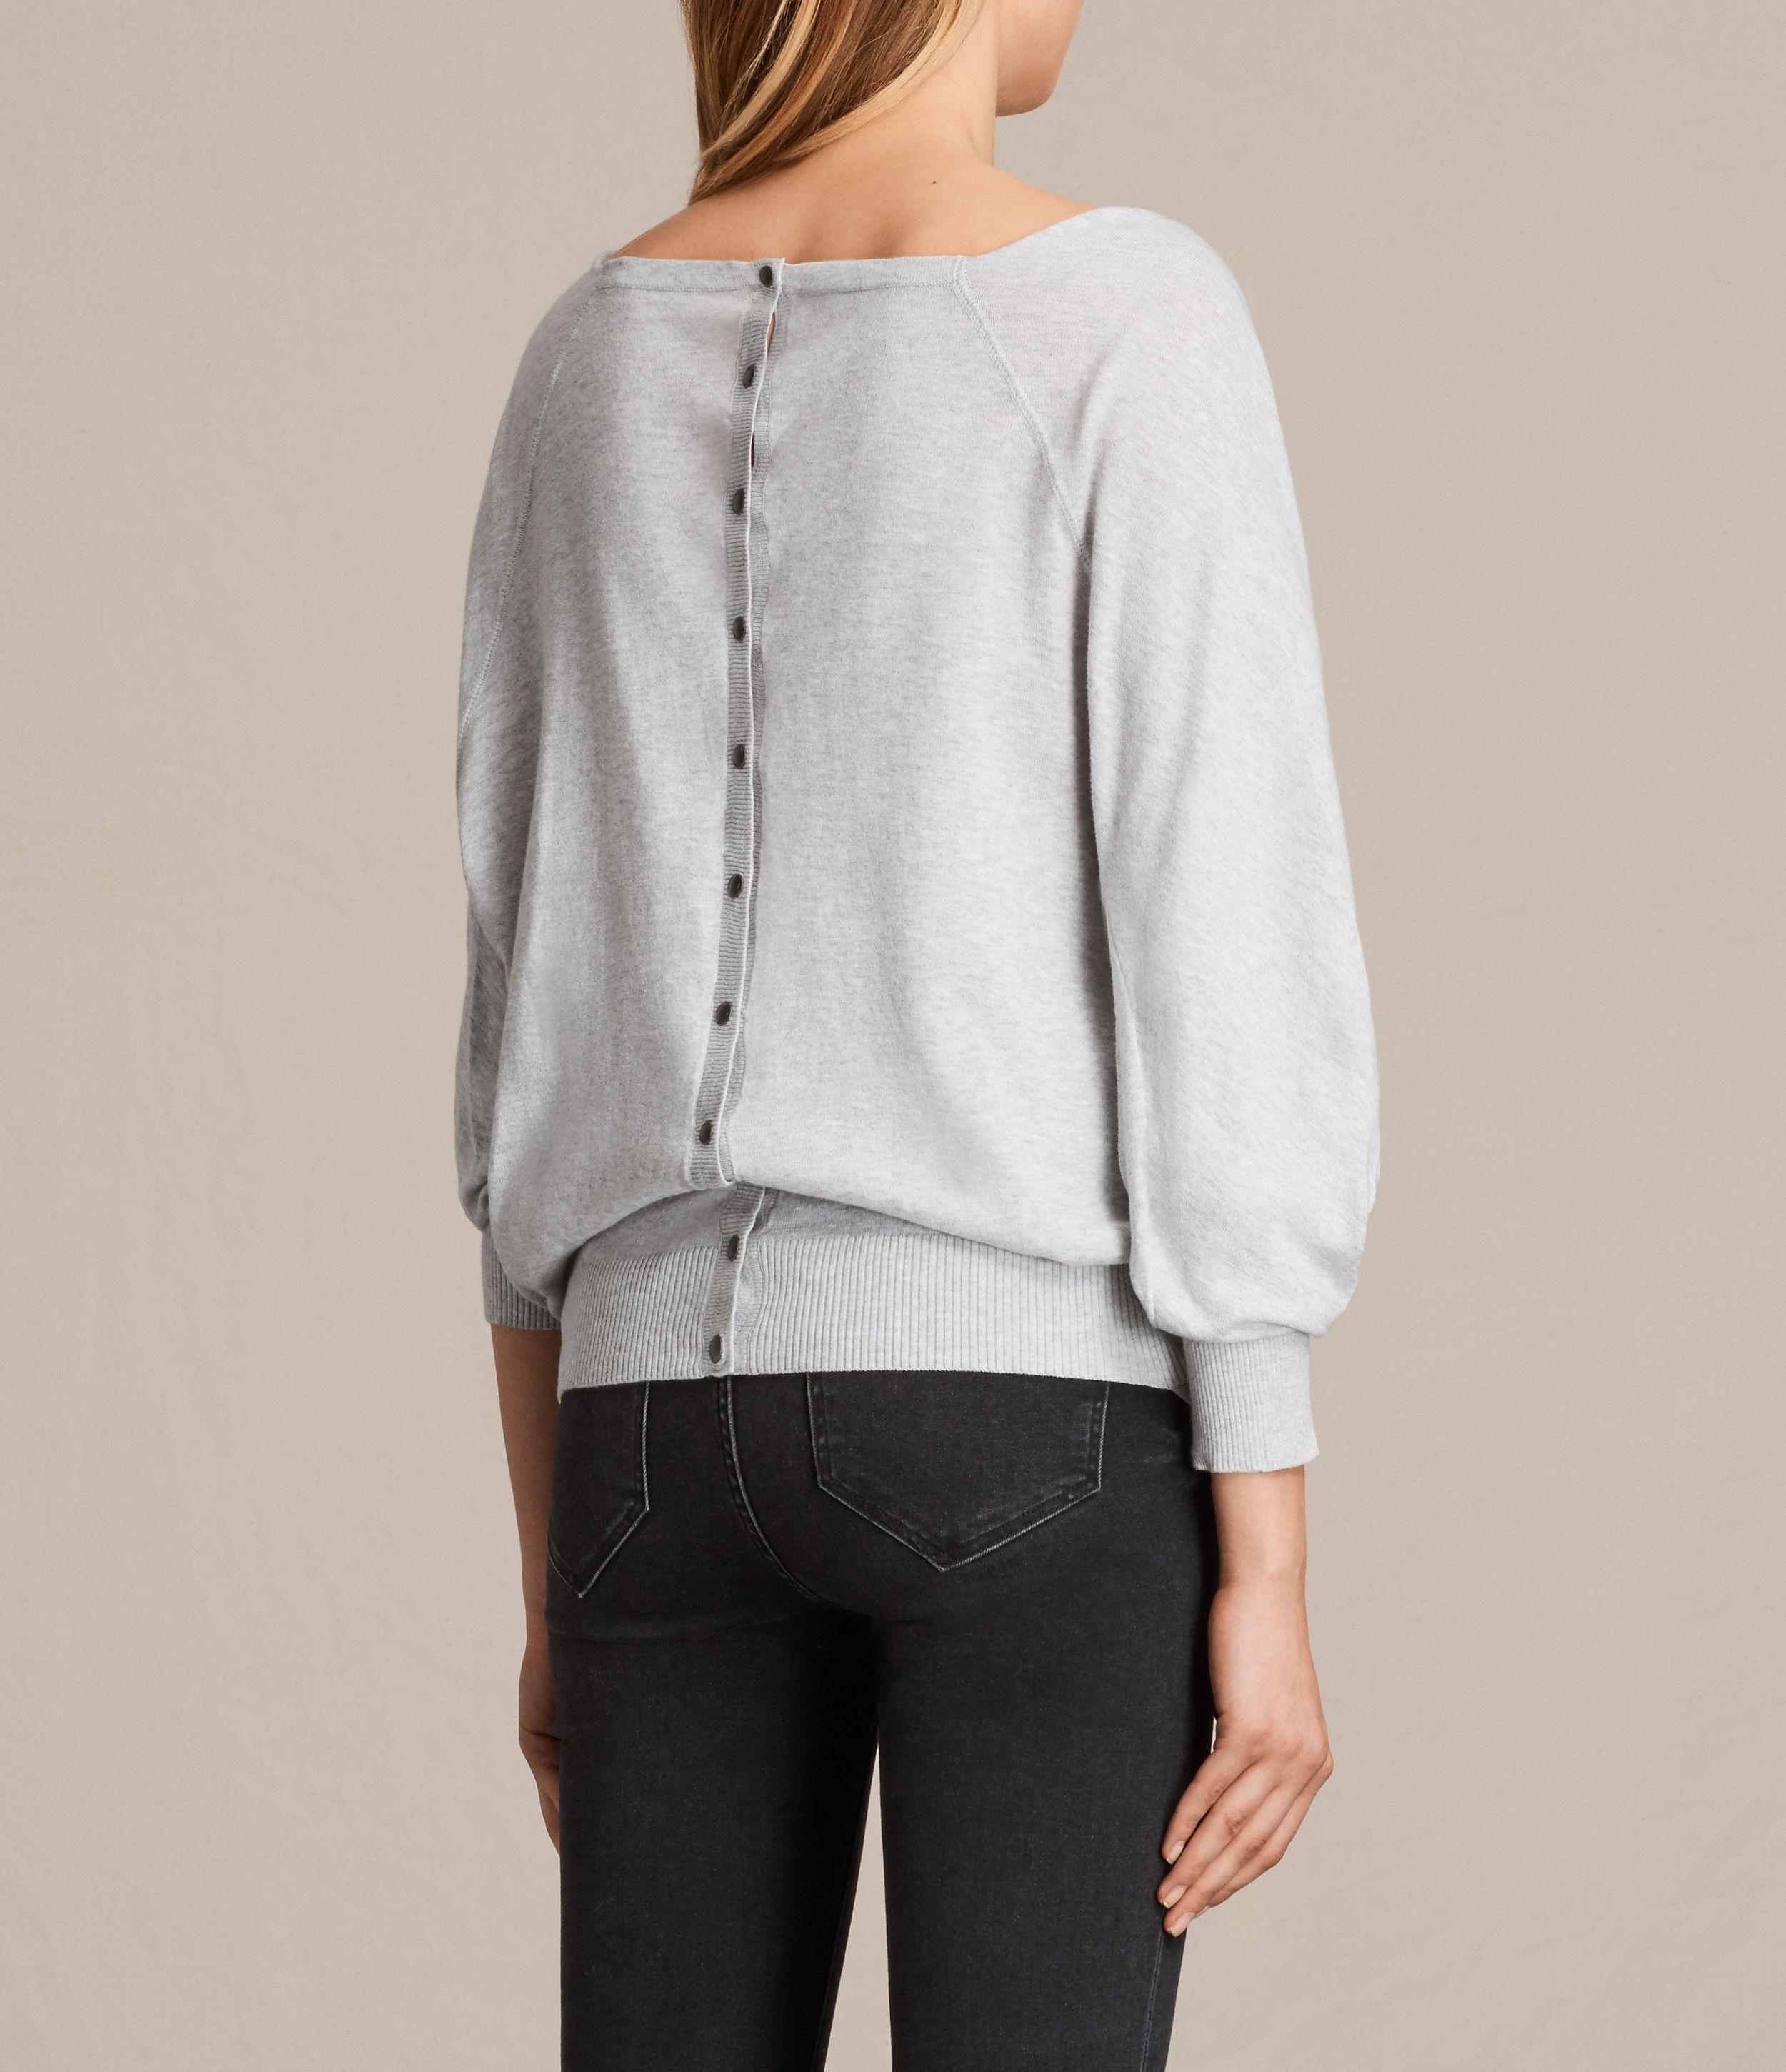 Allsaints Elgar Cowl Neck Sweater Usa Usa in Gray | Lyst